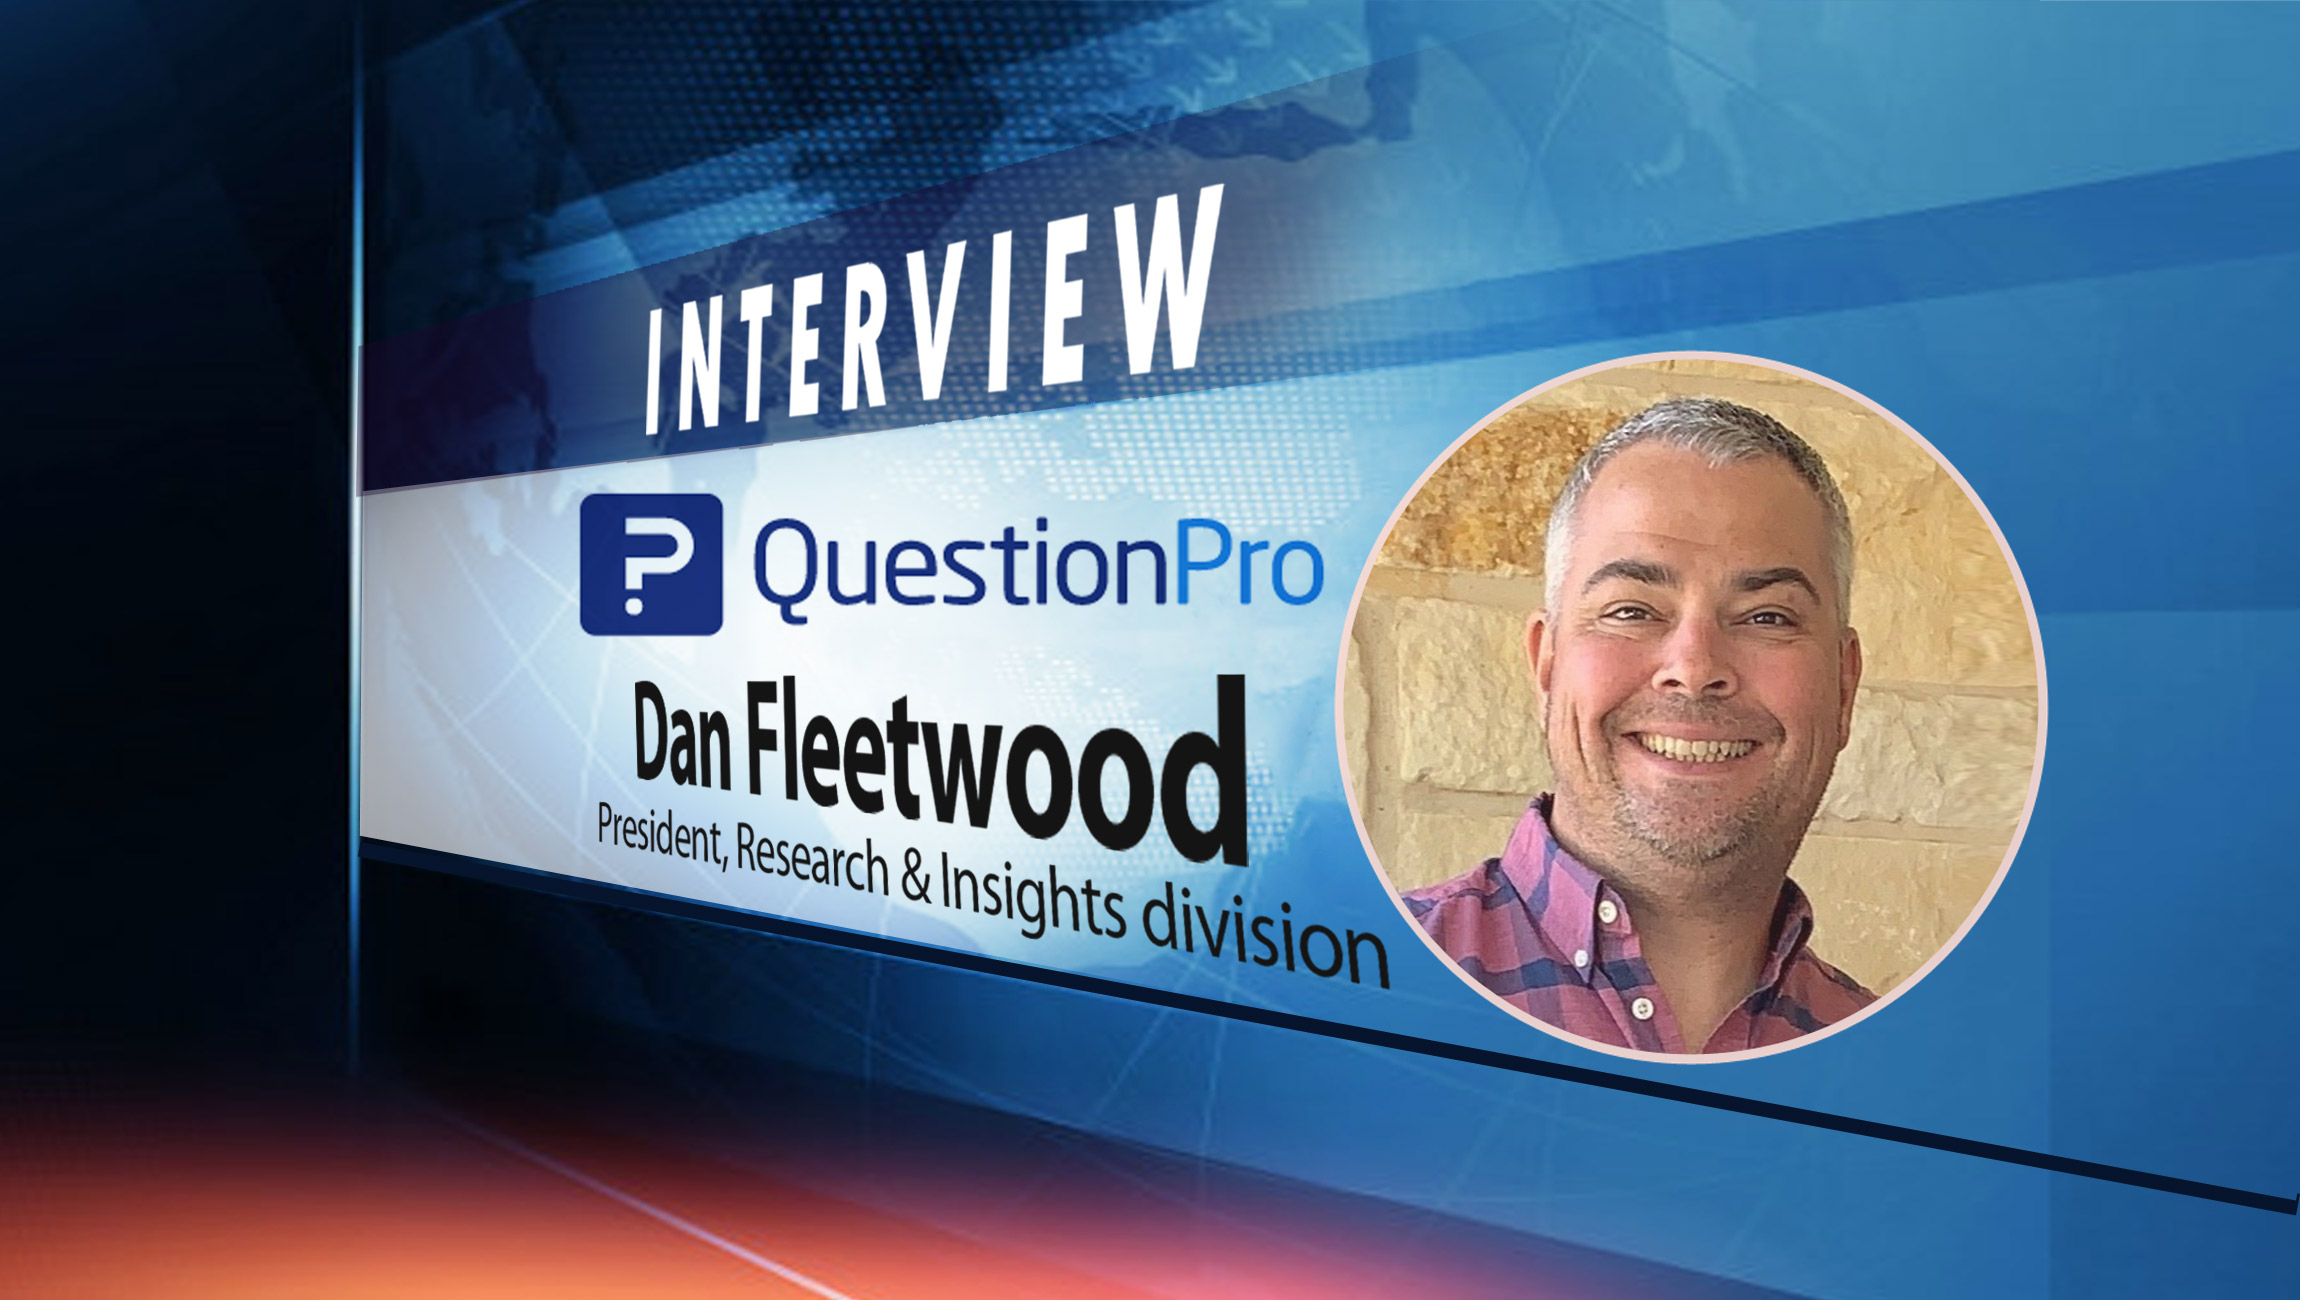 SalesTechStar Interview with Dan Fleetwood, President, Research & Insights Platform at QuestionPro